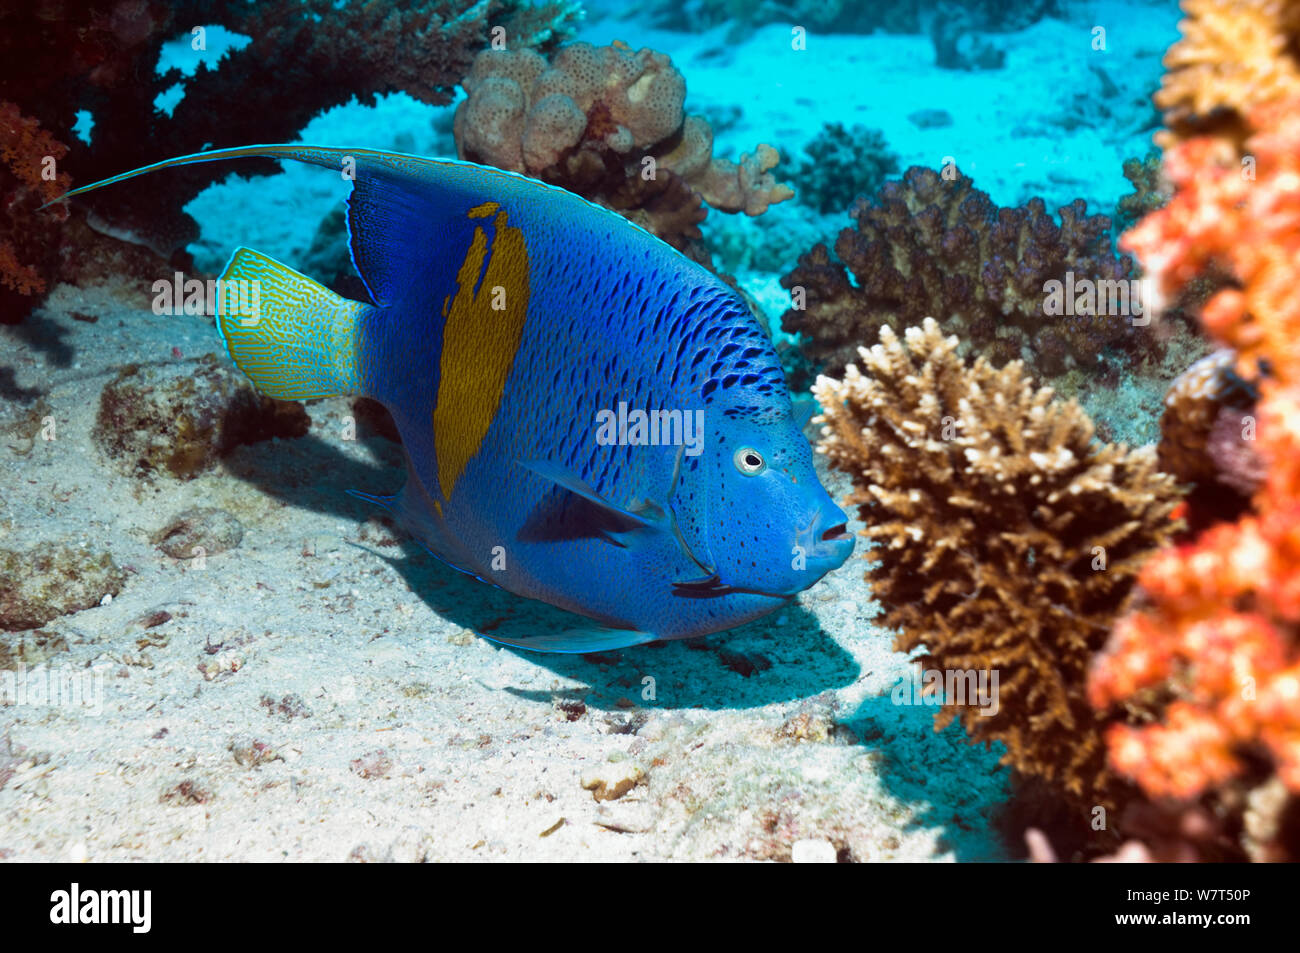 Yellowbar angelfish Pomacanthus maculosus) (Egypte, Mer Rouge. Banque D'Images